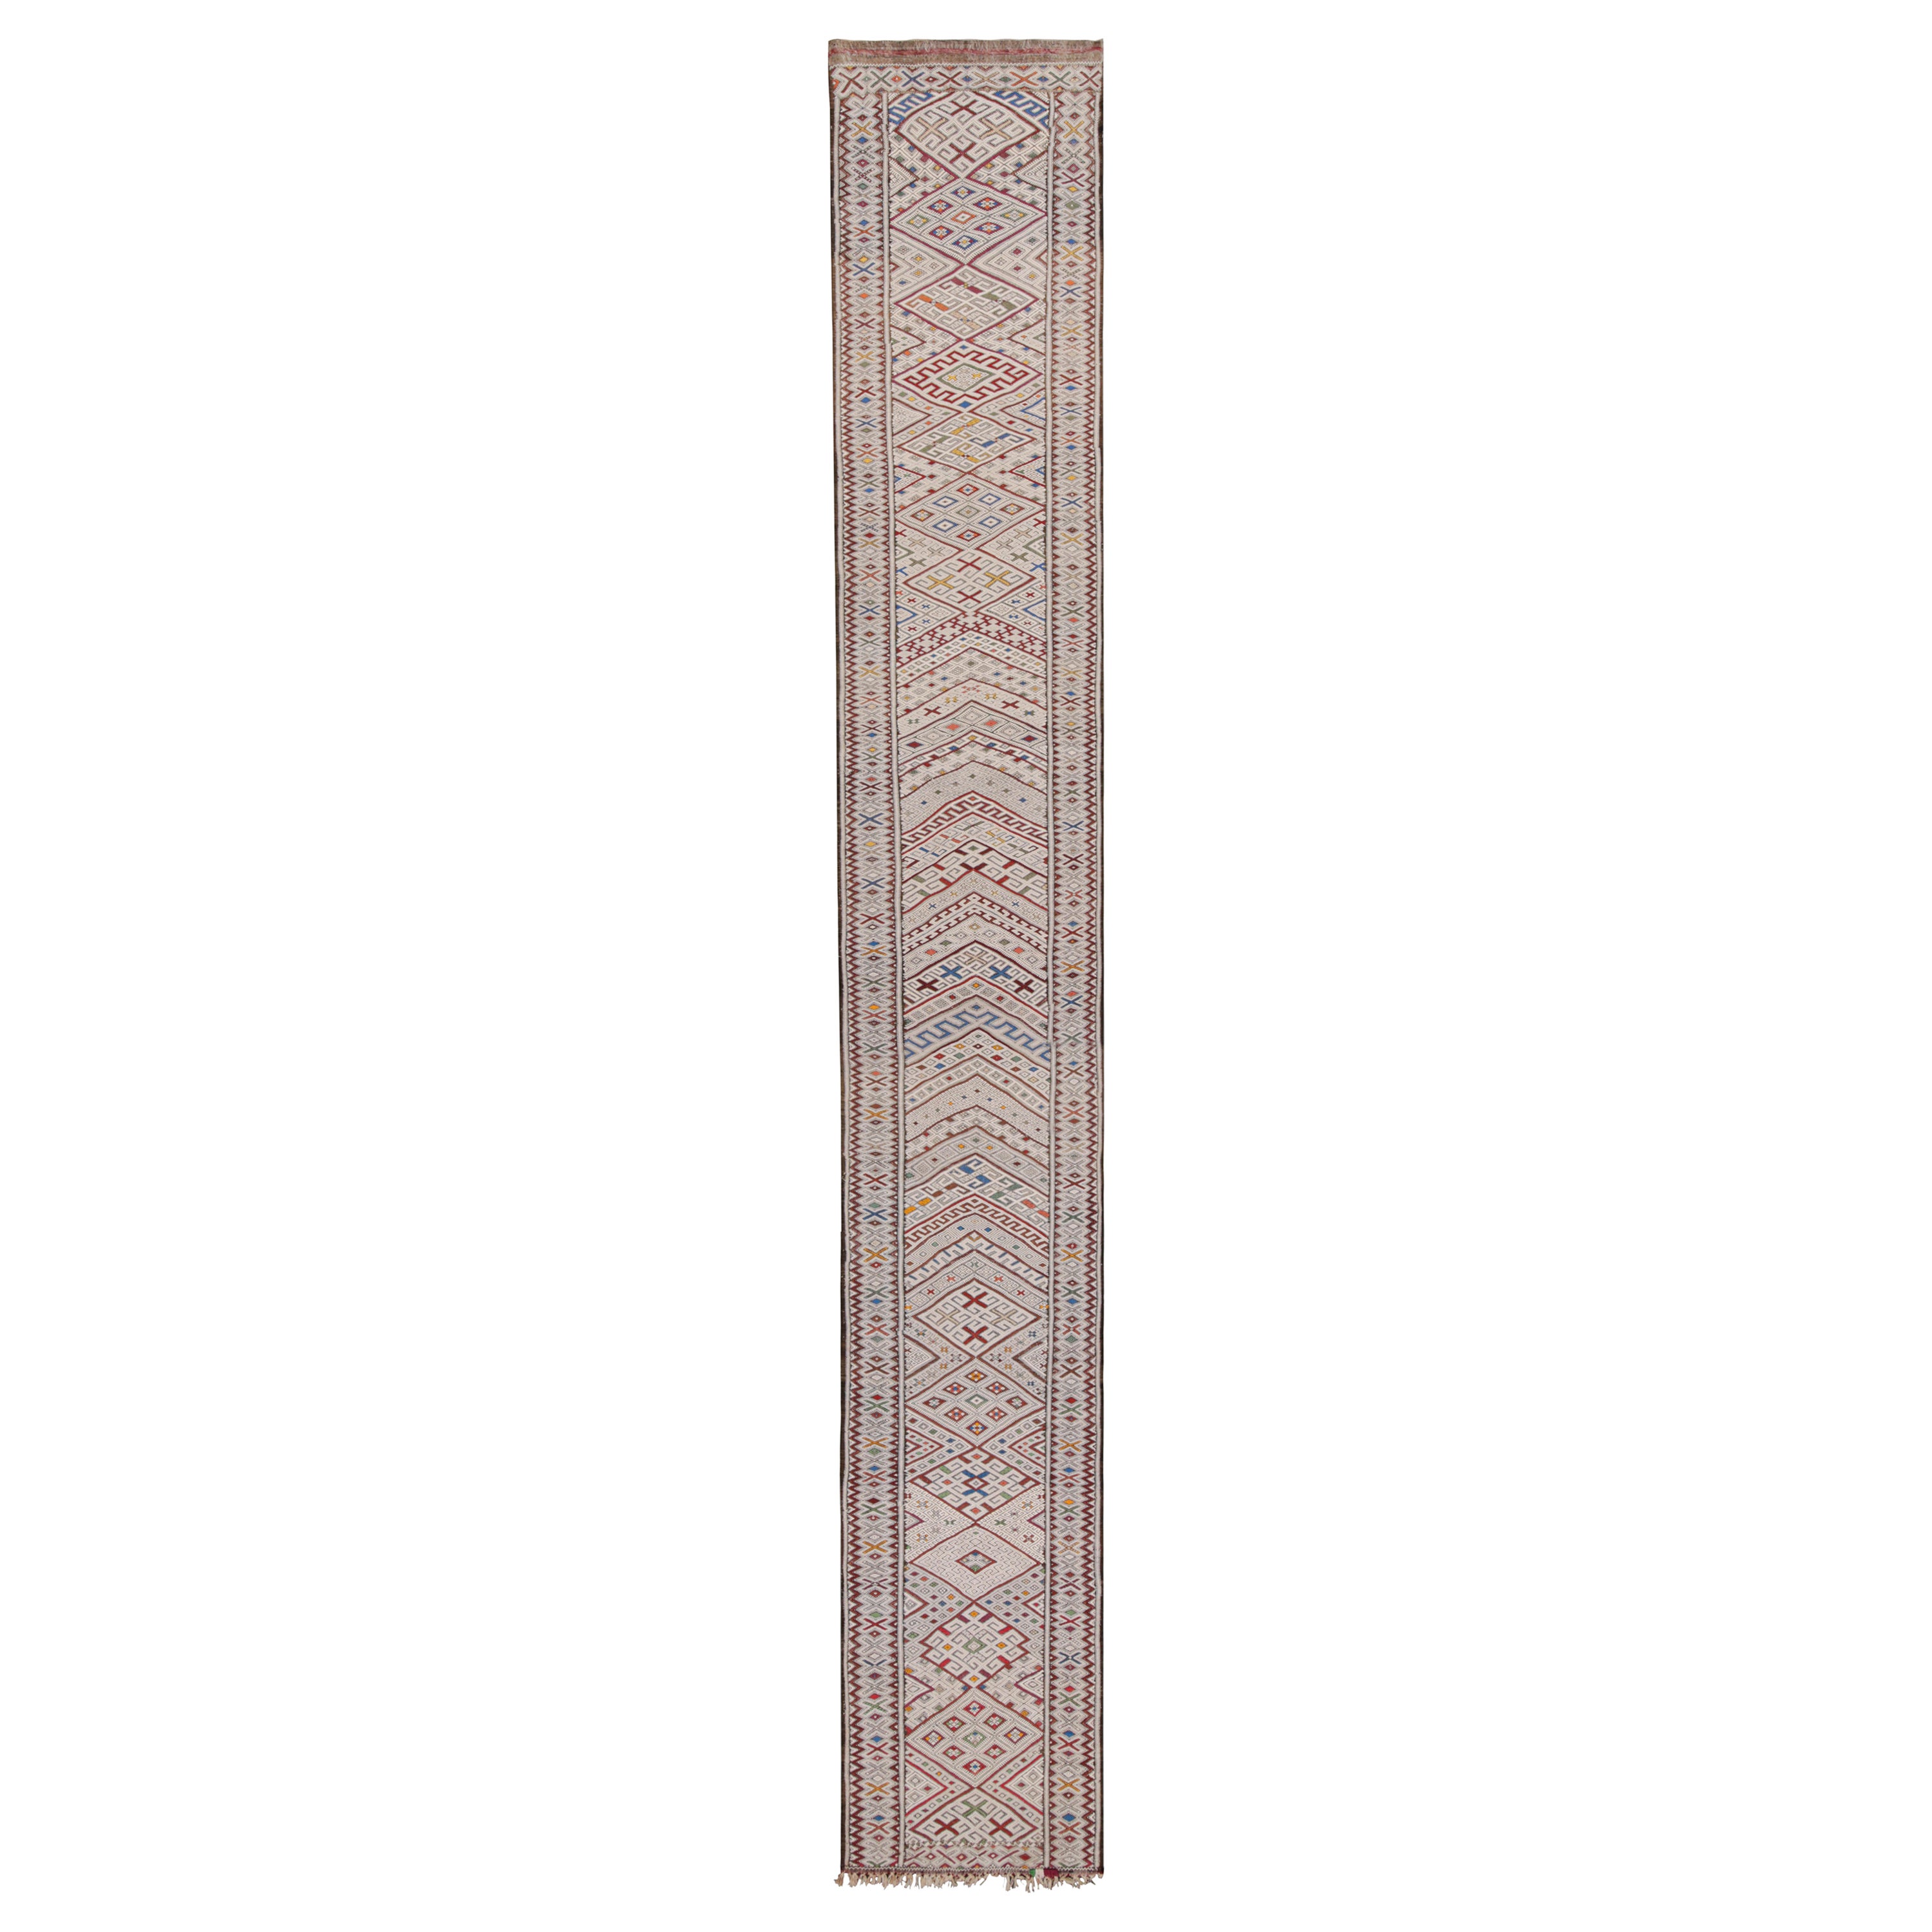 Vintage Moroccan Kilim Runner with Polychromatic Patterns by Rug & Kilim